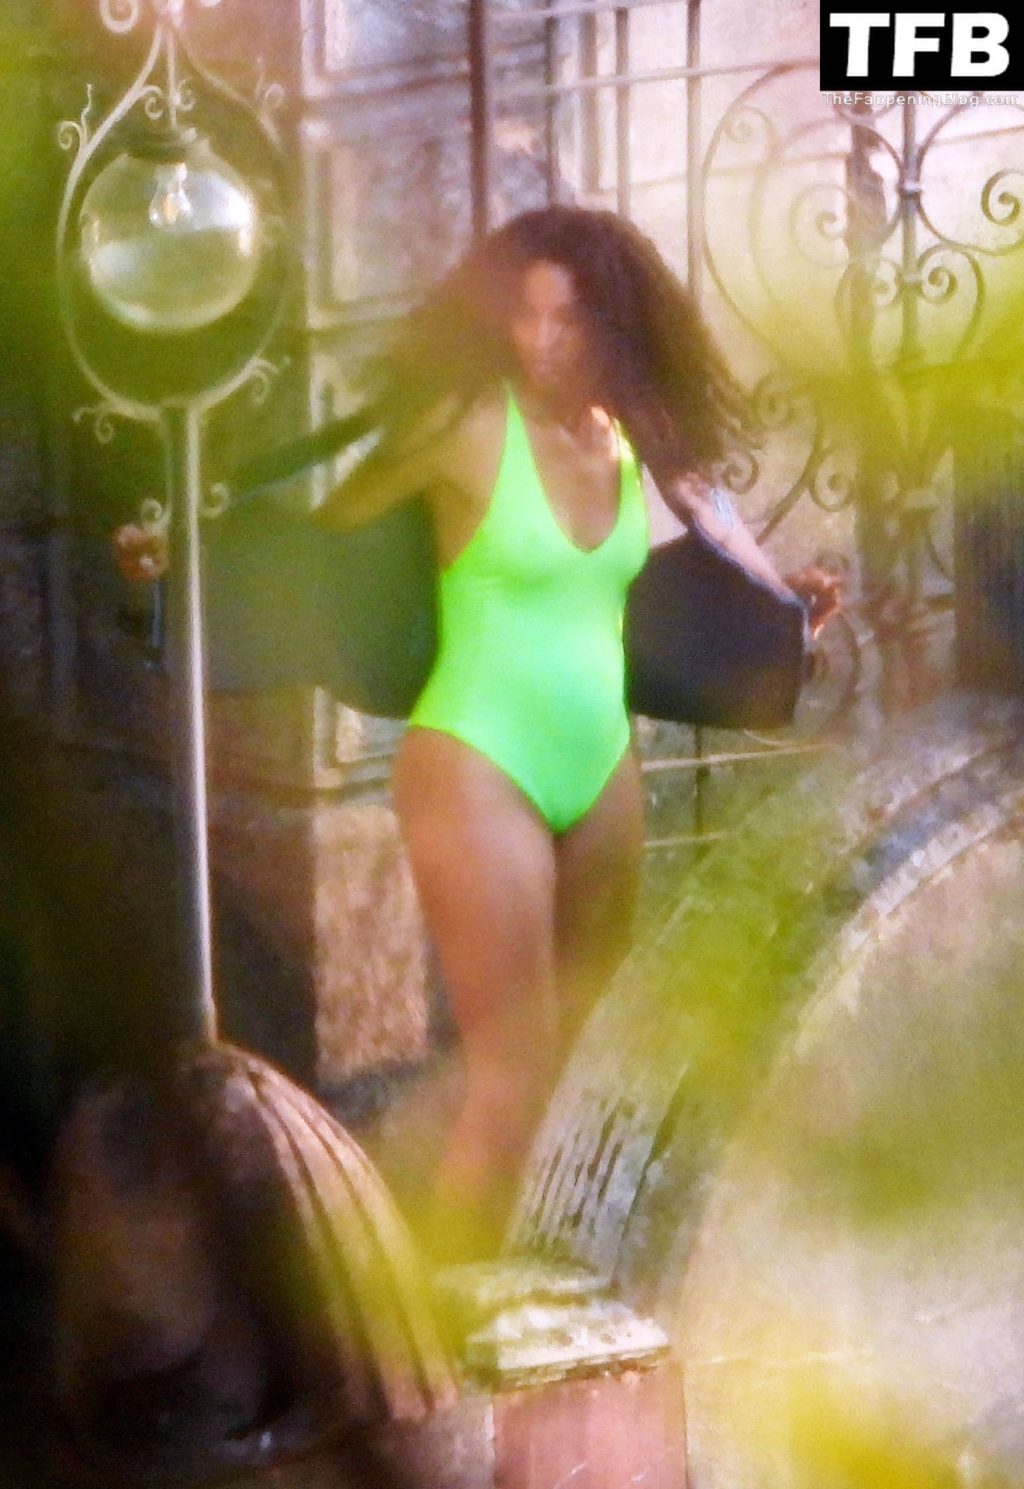 Ciara Looks Hot in Her Lime Green Swimsuit (65 Photos)